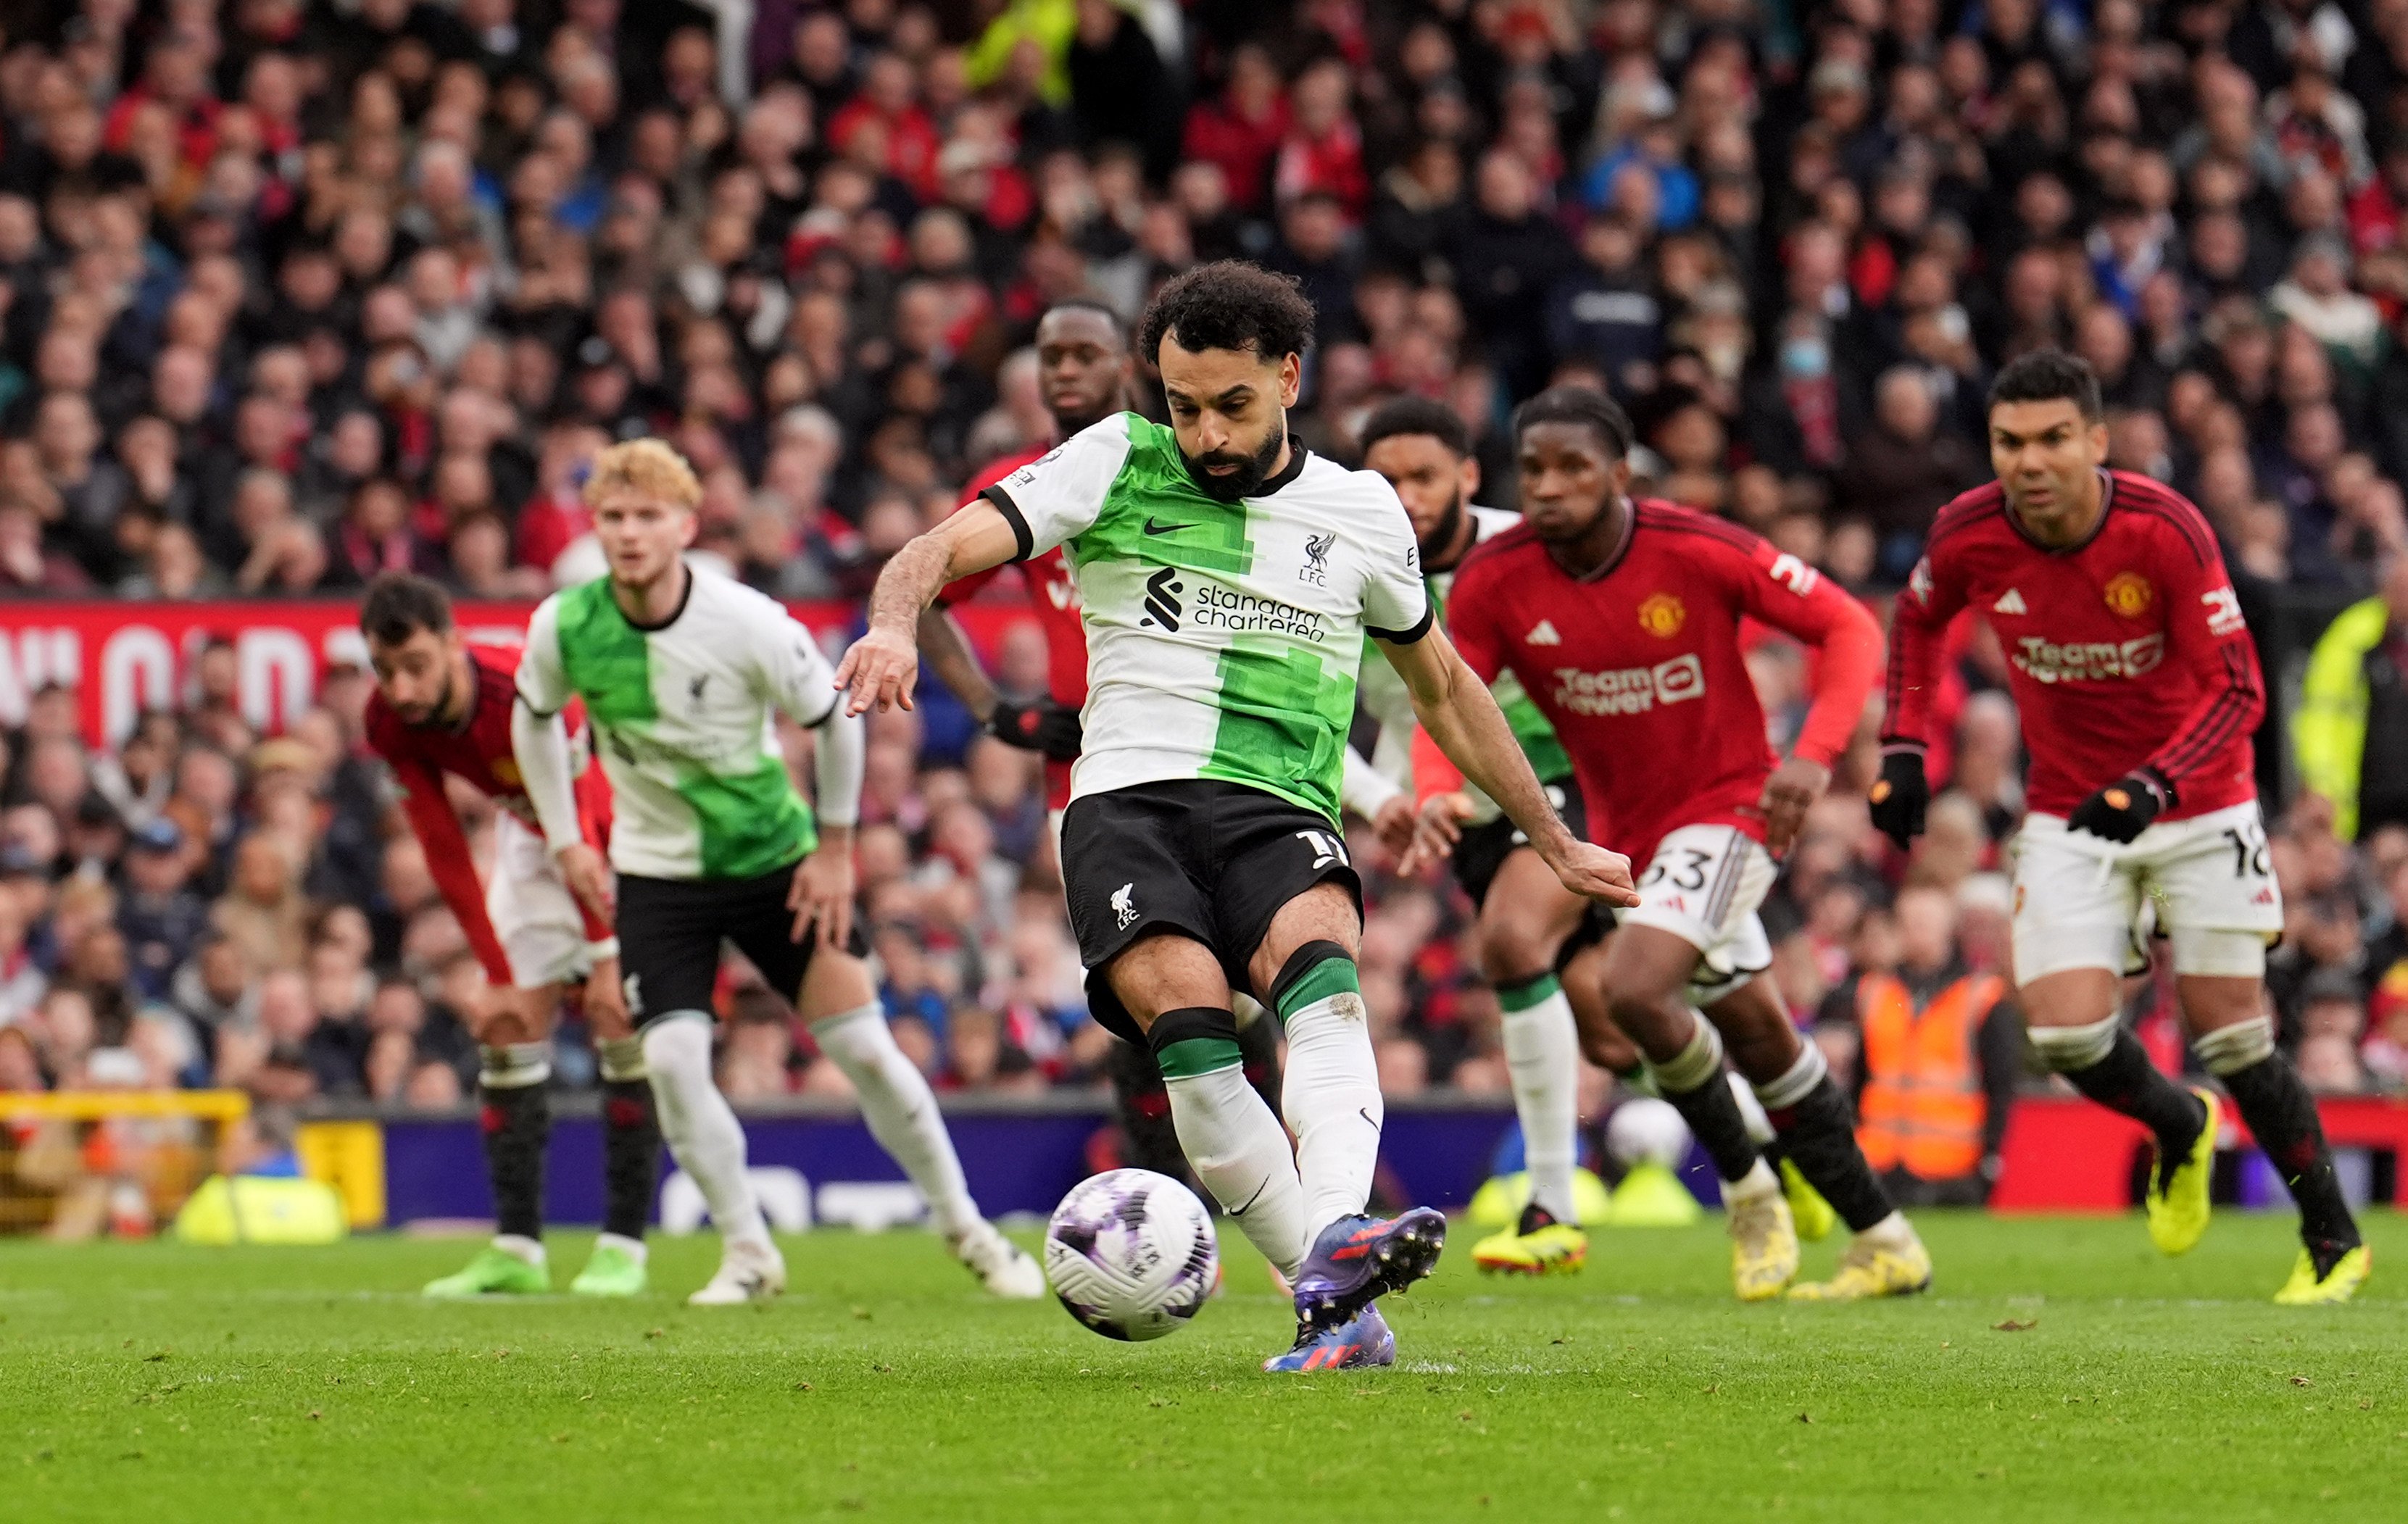 Liverpool’s Mohamed Salah scores his team’s second goal of the game during their English Premier League soccer match against Manchester United. Photo: dpa